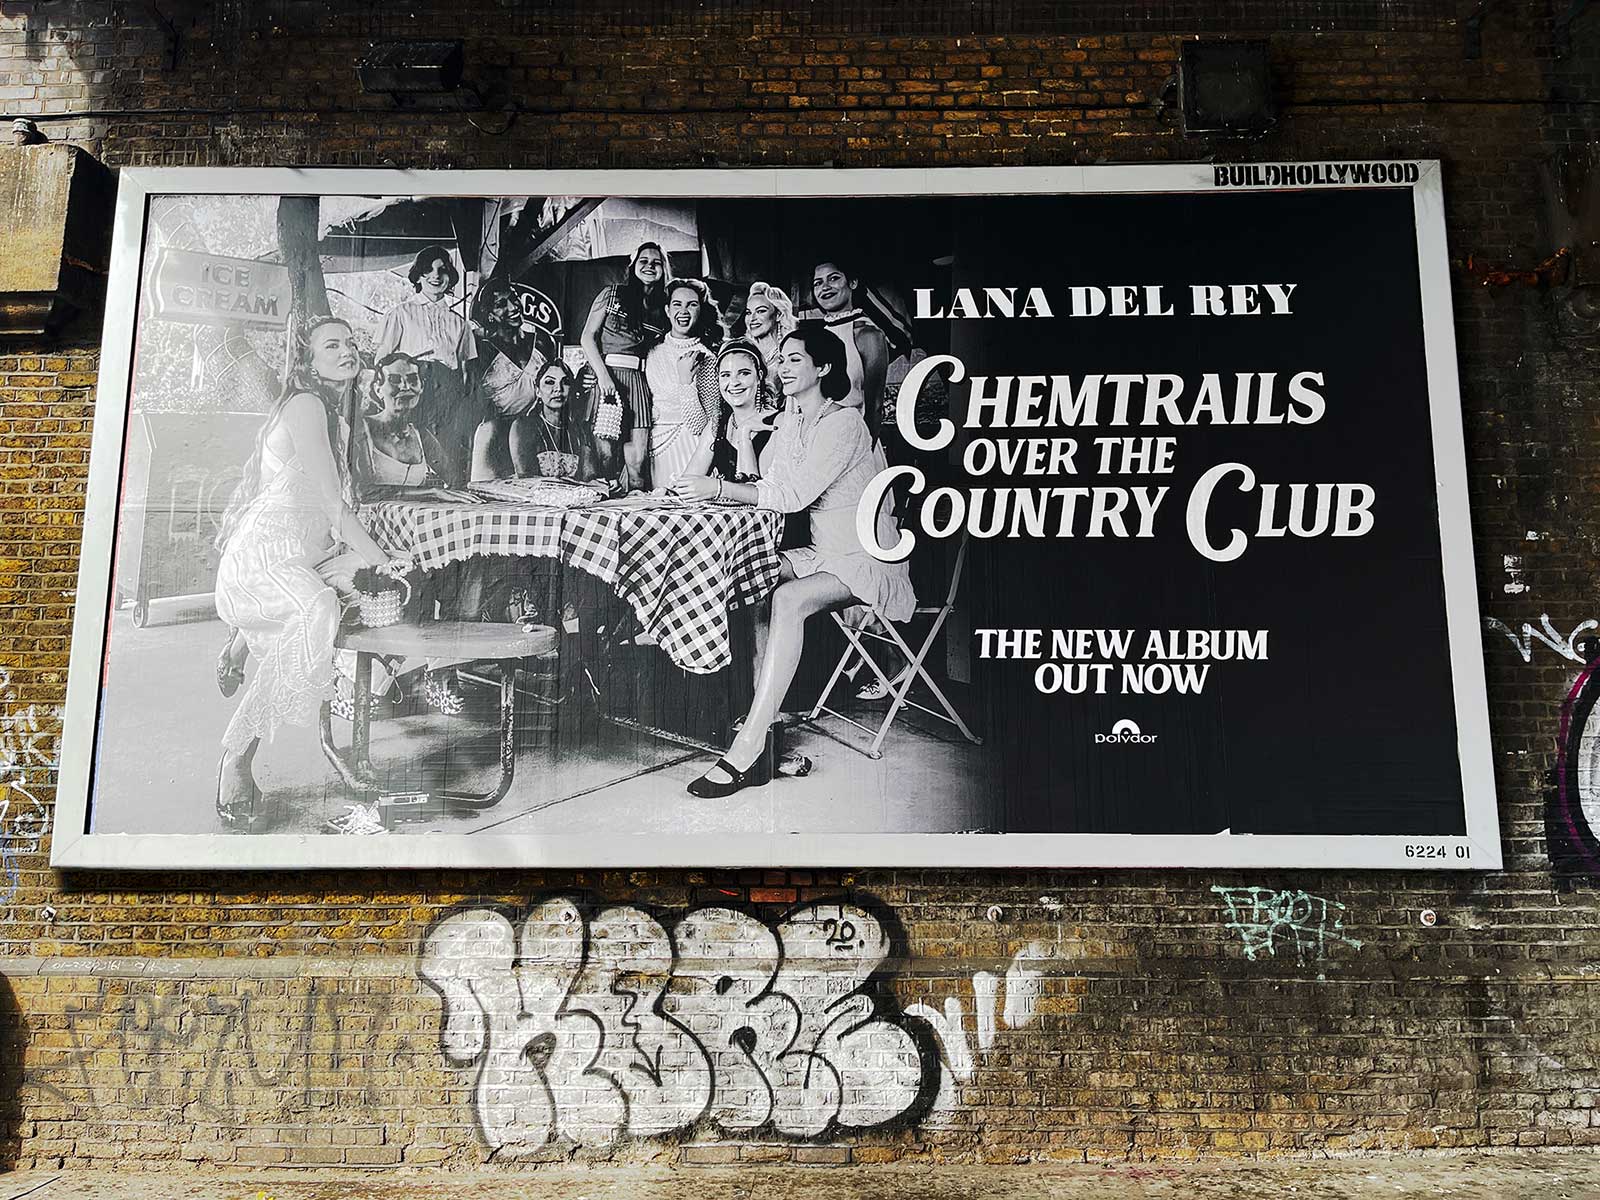 Lana Del Rey: Chemtrails Over the Country Club - Street posters - DIABOLICAL